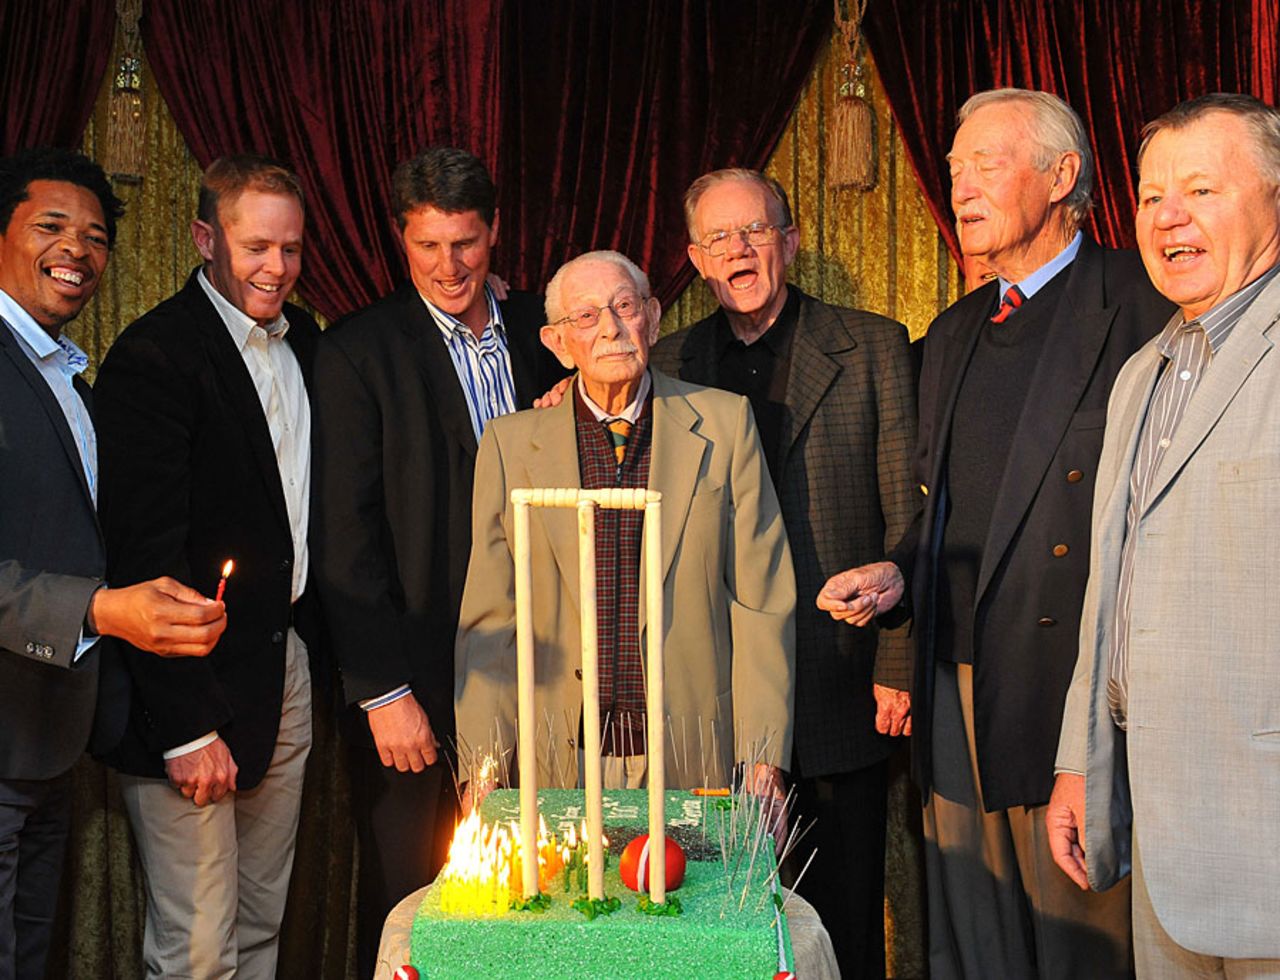 Former South African cricketers greet Norman Gordon on his 100th birthday, Johannesburg, August 6, 2011